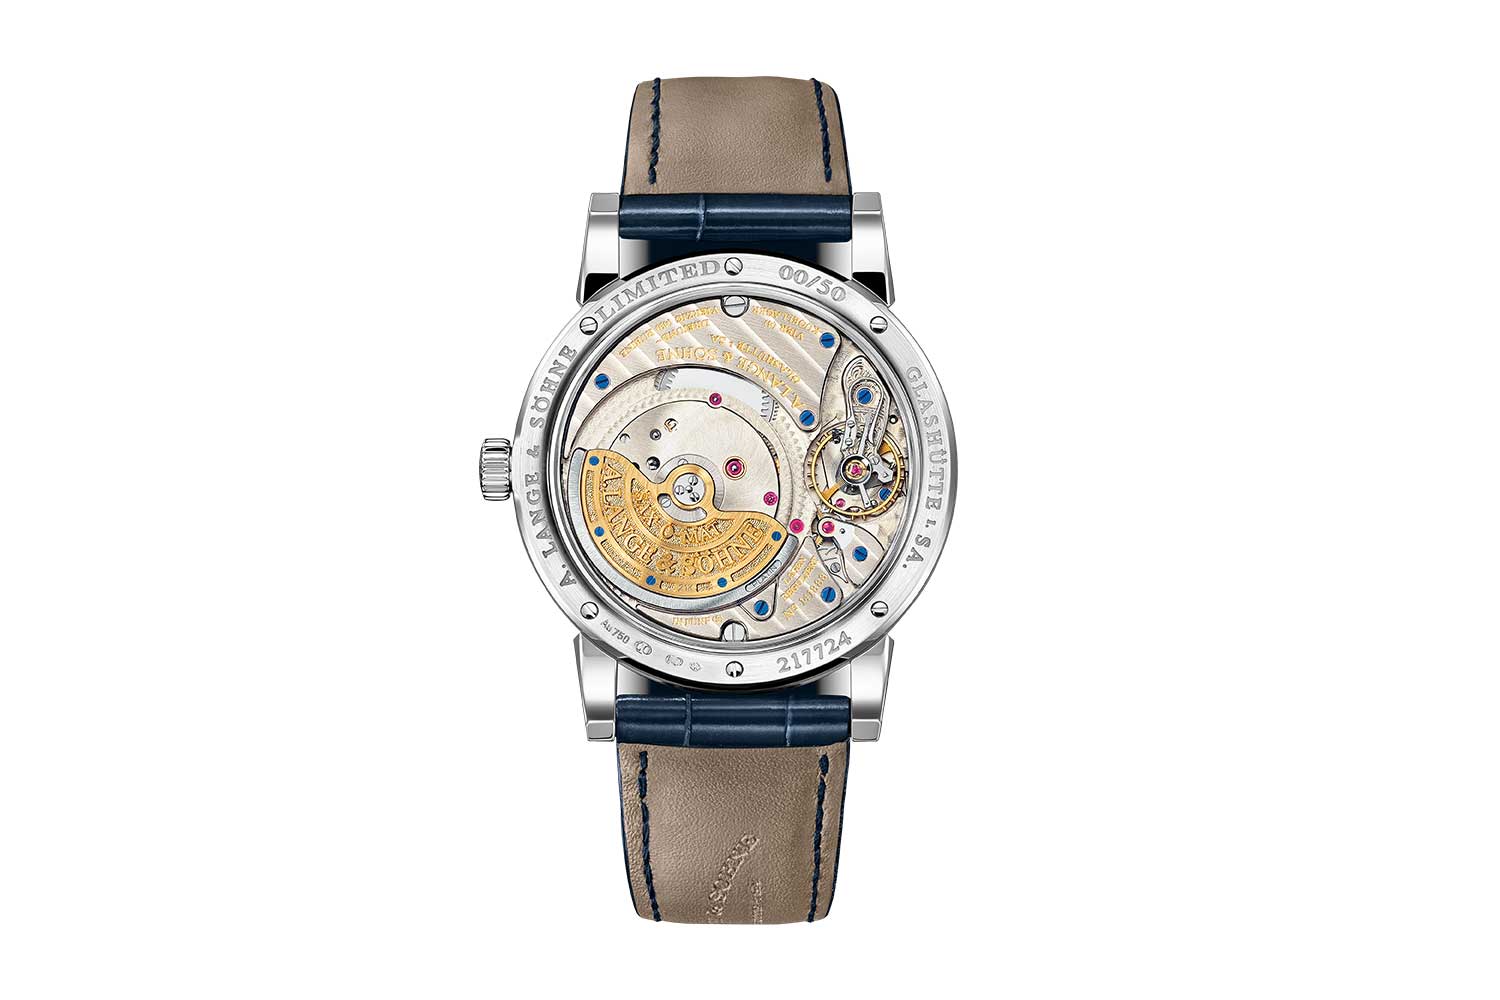 The 2021 Langematik Perpetual in white gold with blue dial – ref. 310.028